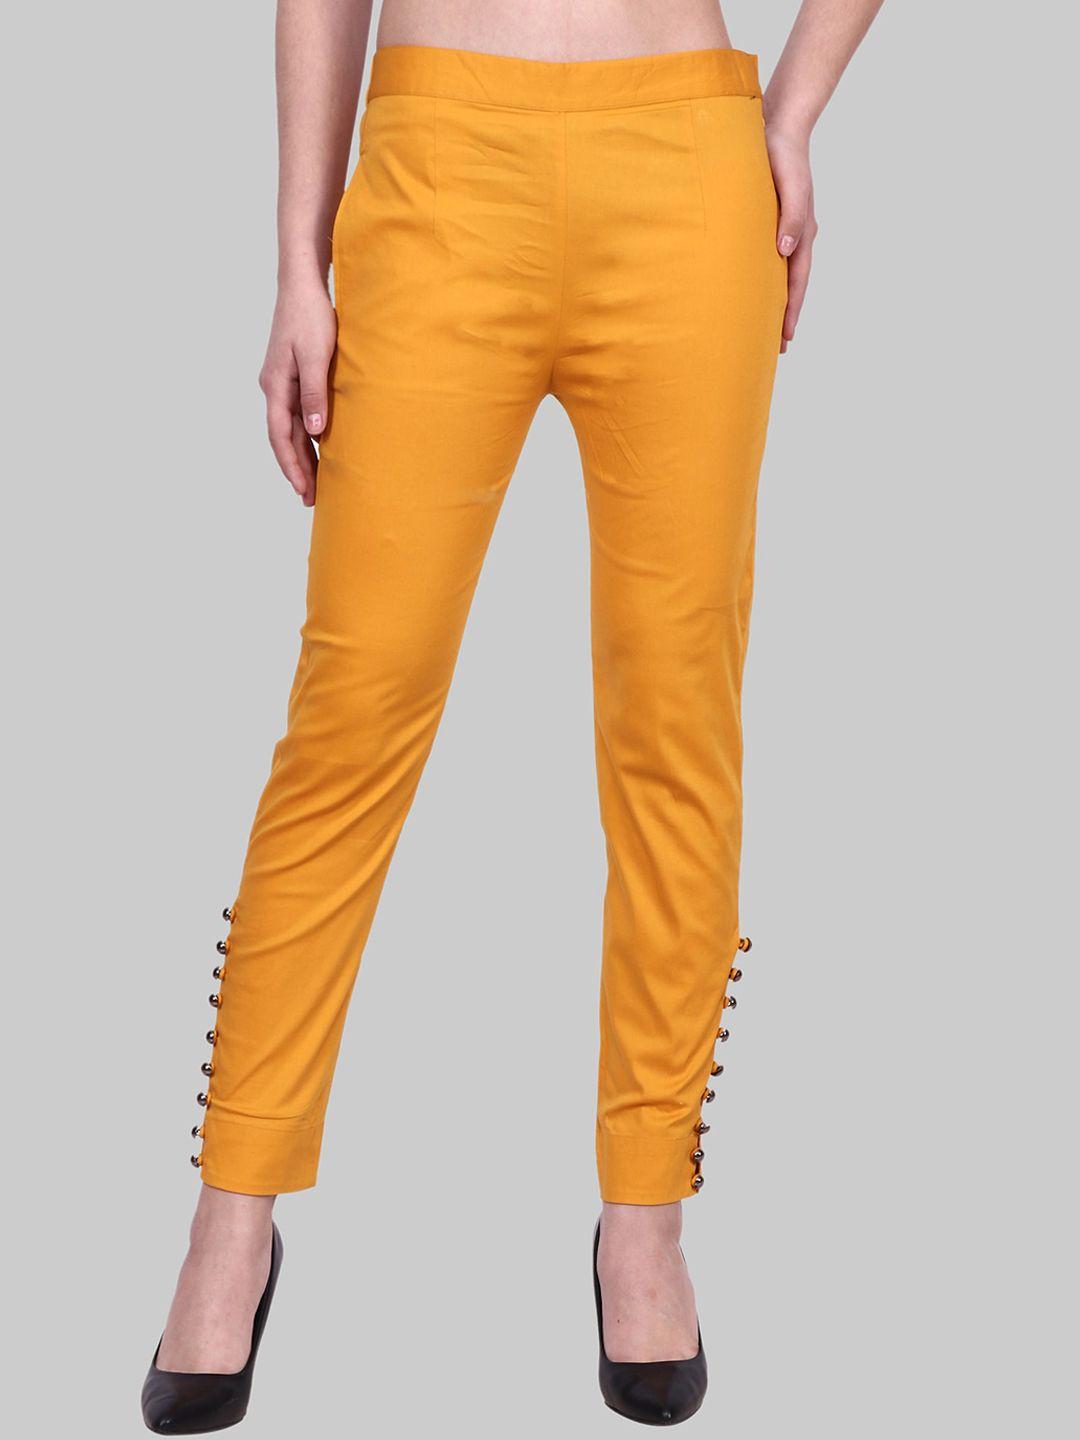 popwings-women-mid-rise-stretchable-slim-fit-cotton-trousers